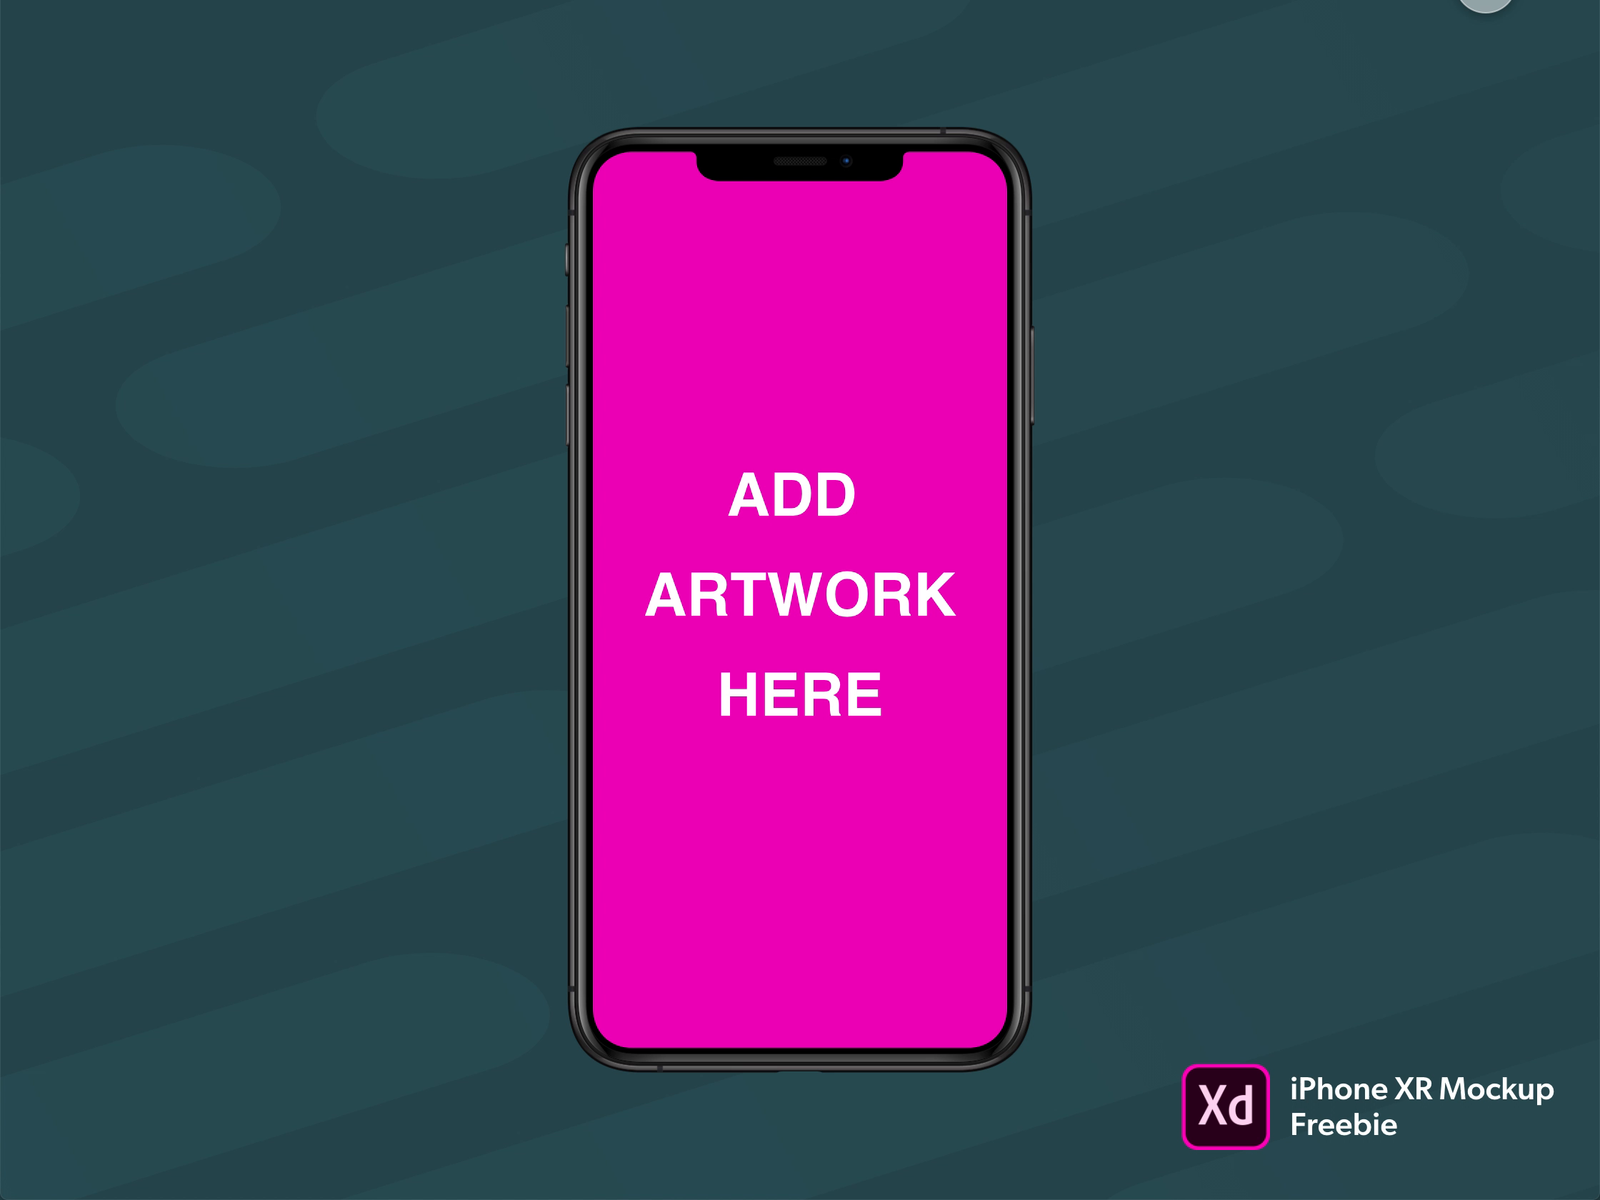 Download Free iPhone XR Mockup for Adobe XD by Tommy Lofgren on ...